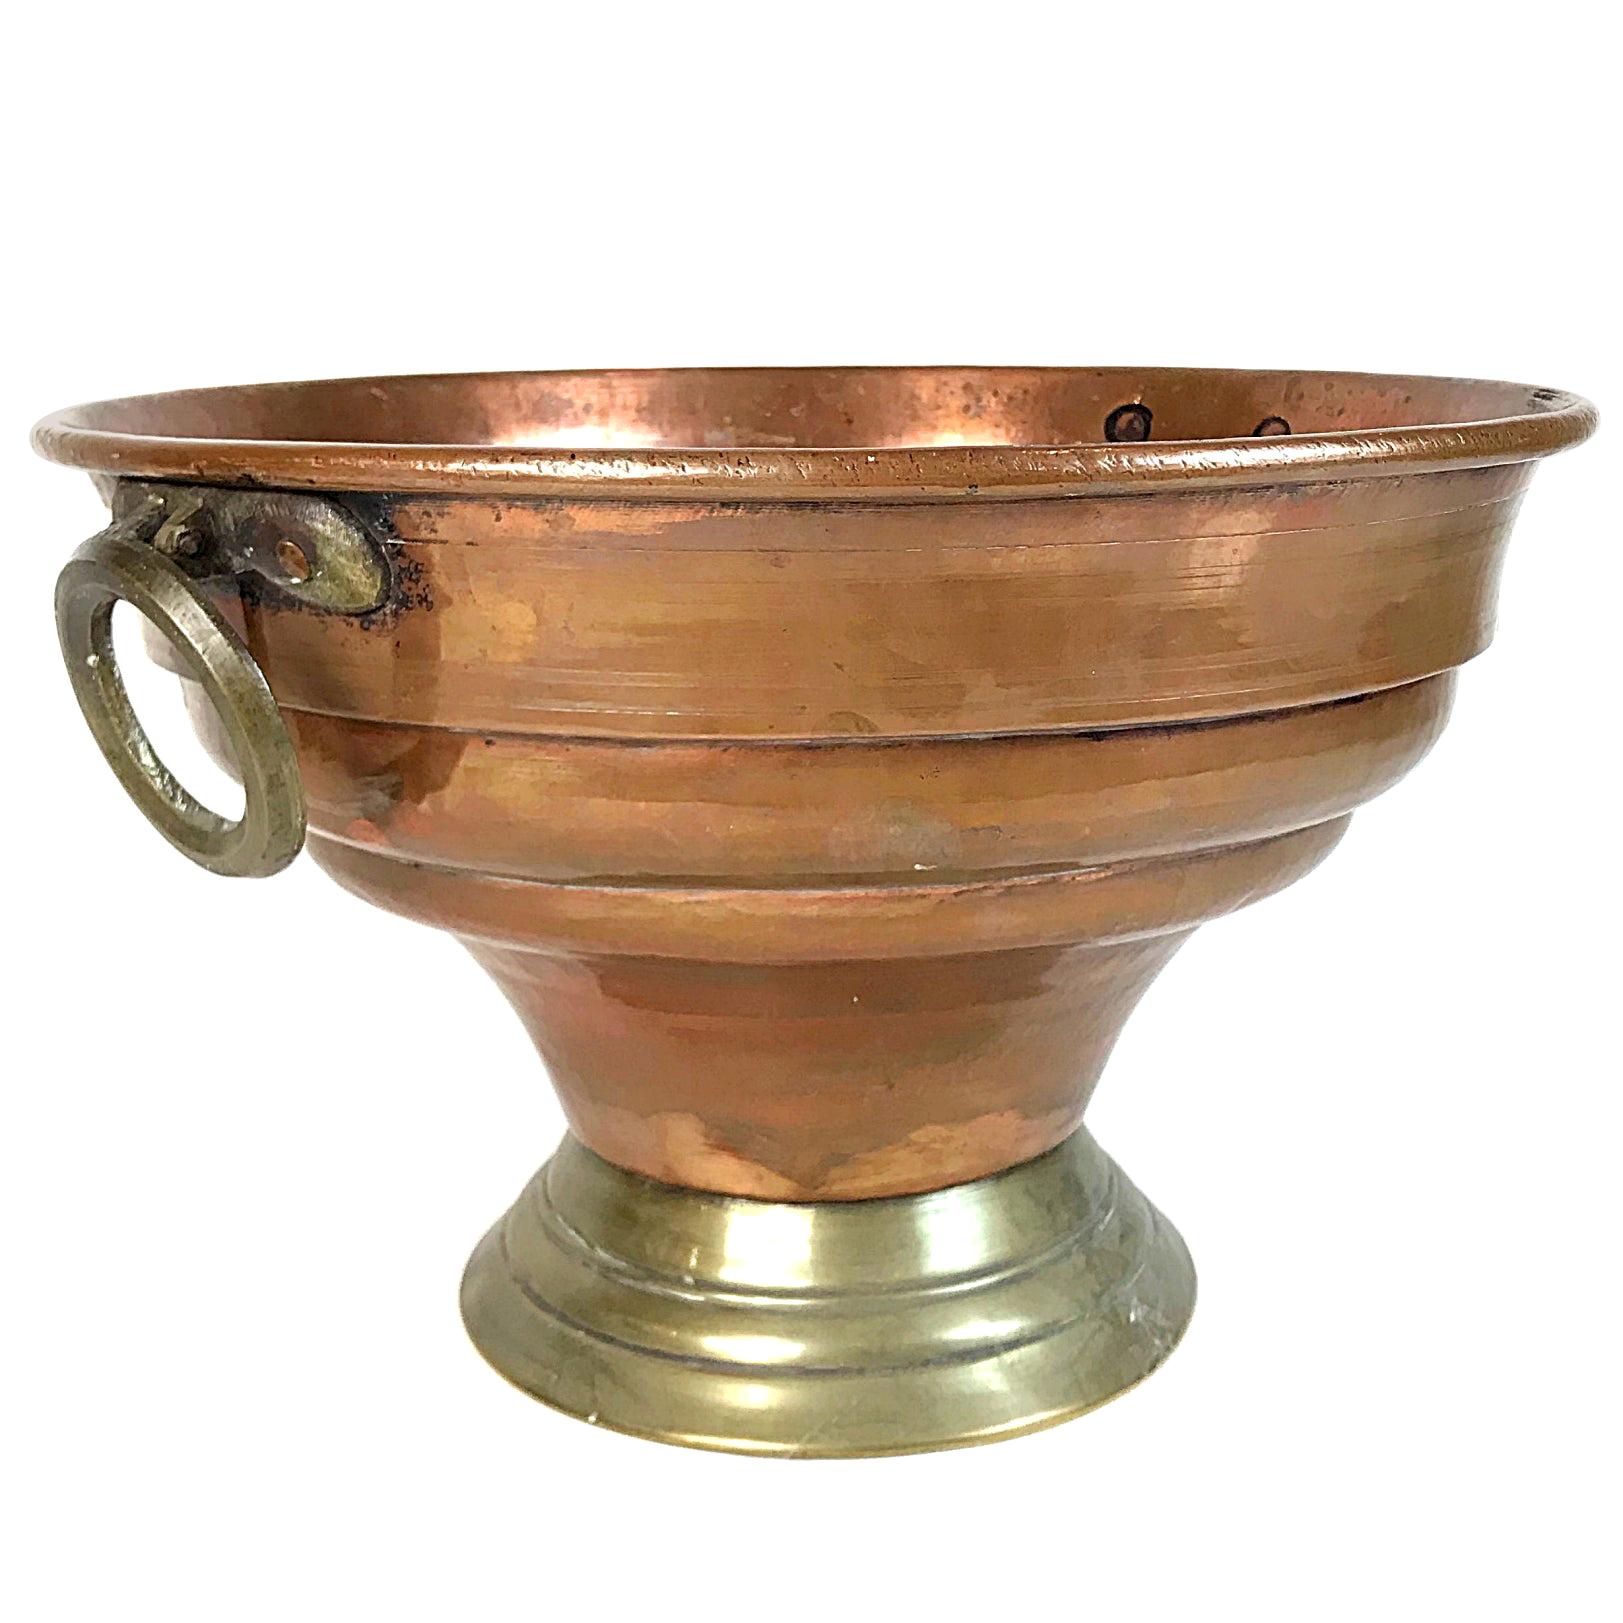 Large Antique French Copper Brass Champagne / Wine Cooler, 1850s, France